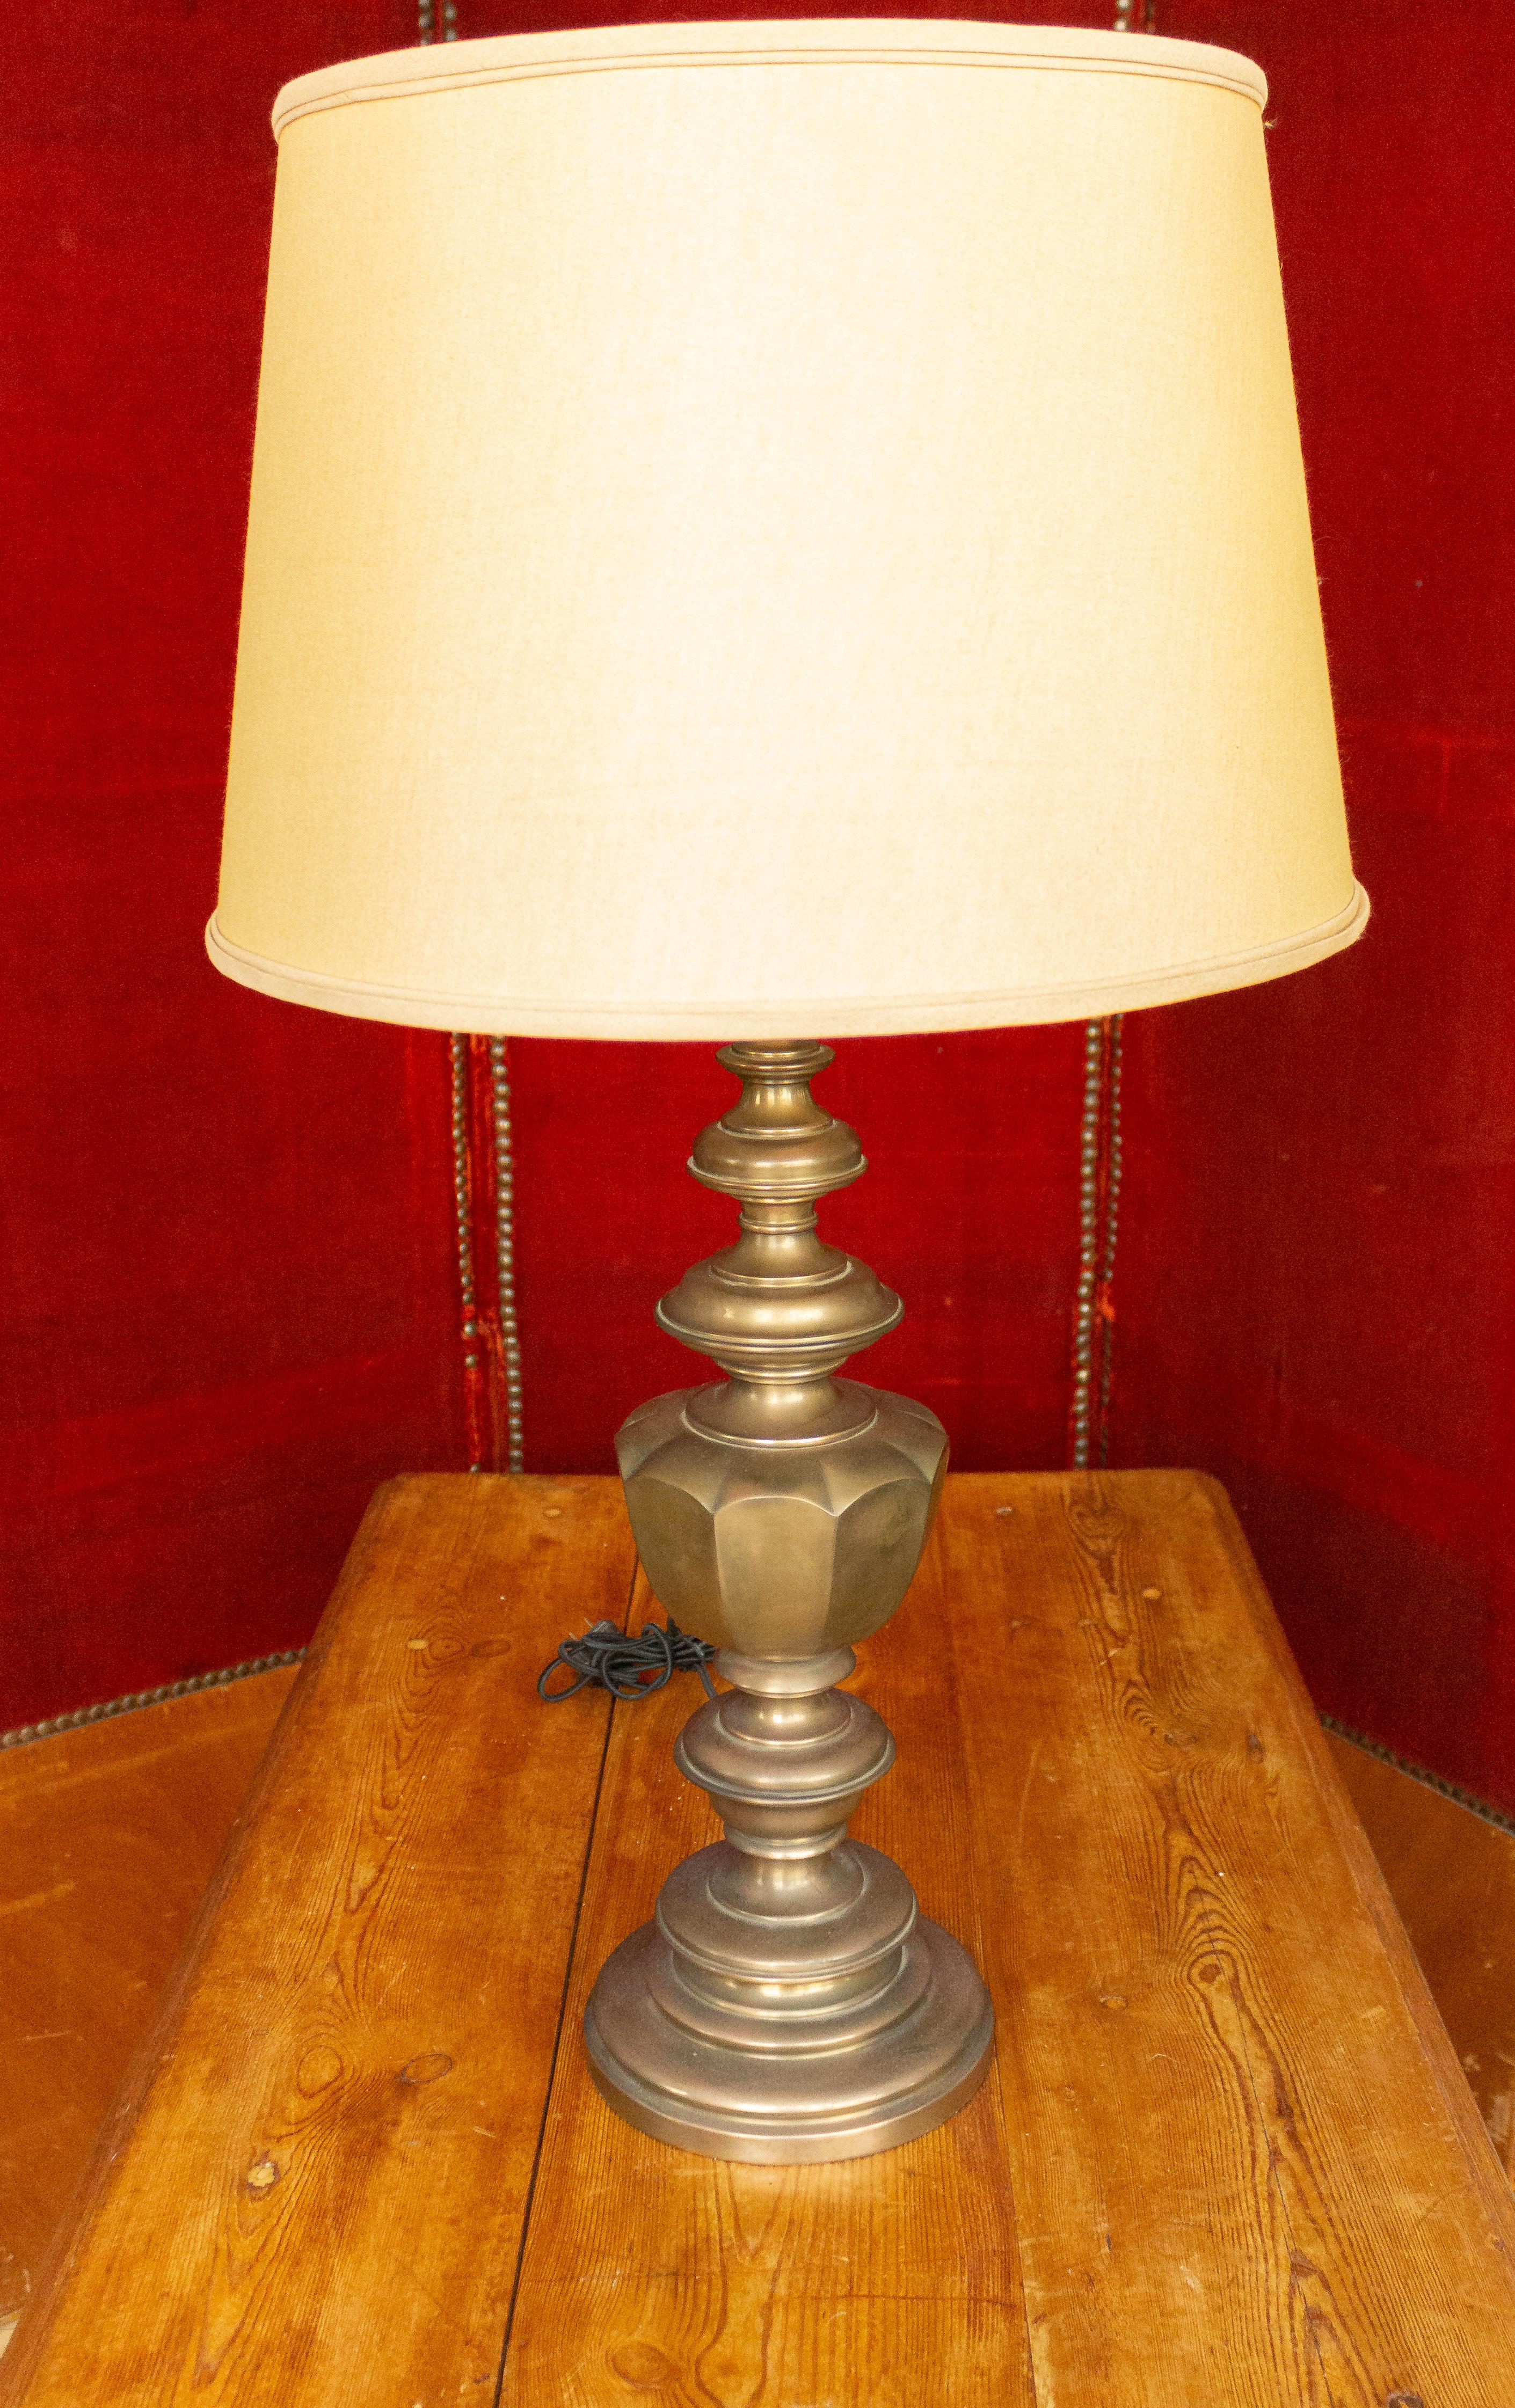 Elegant pair of American lamps with an English brass finish. Not sold with shades